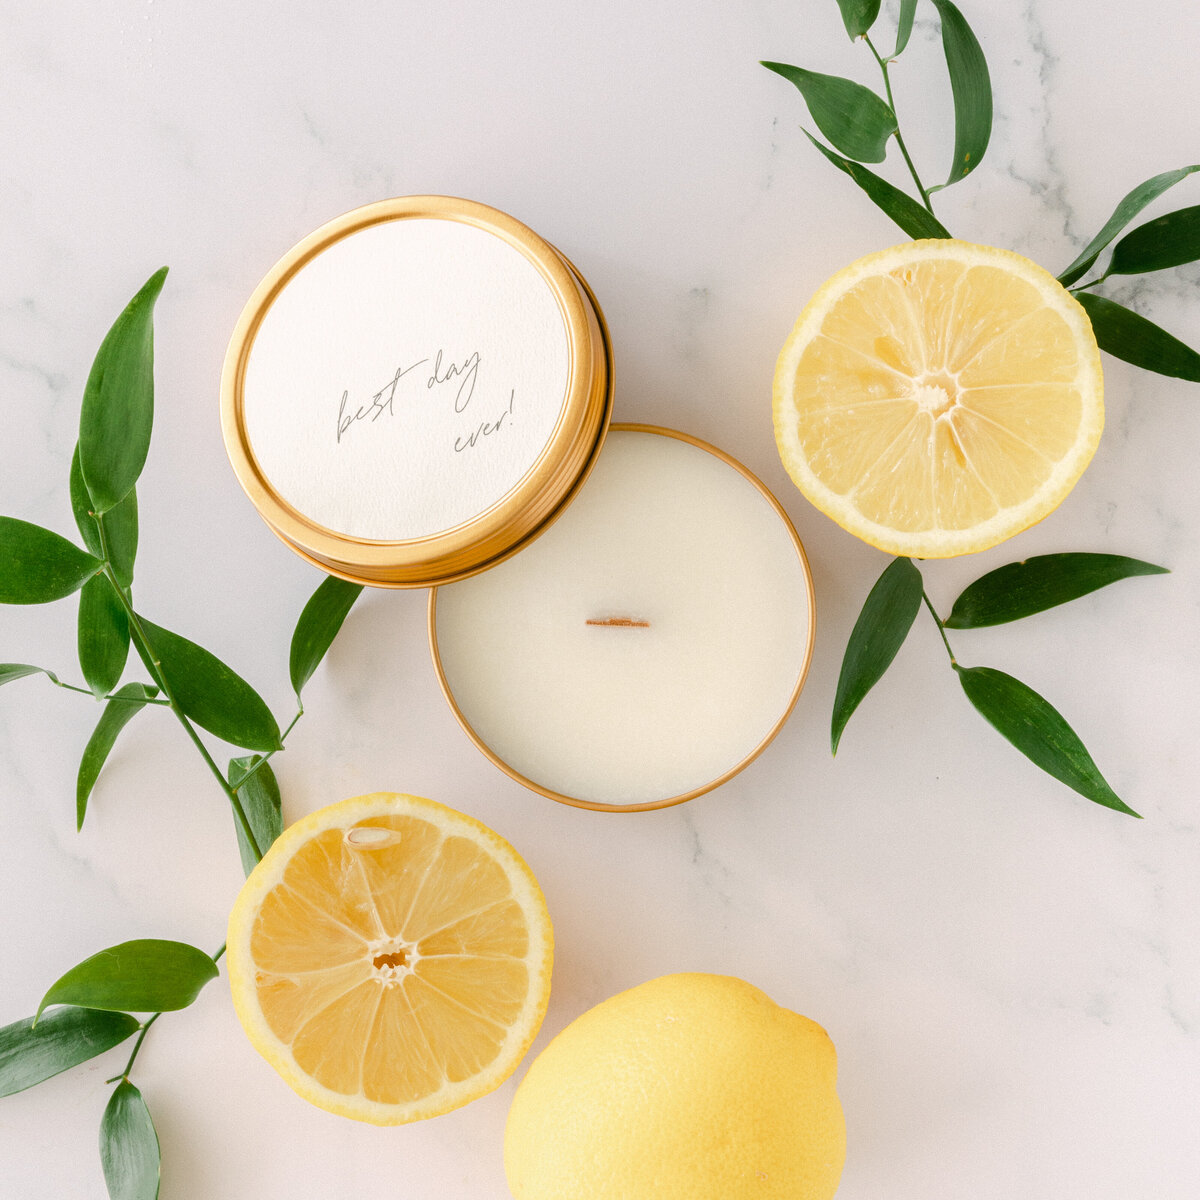 Best Day Ever! Travel Candle Olive Leaf and Lemon 2